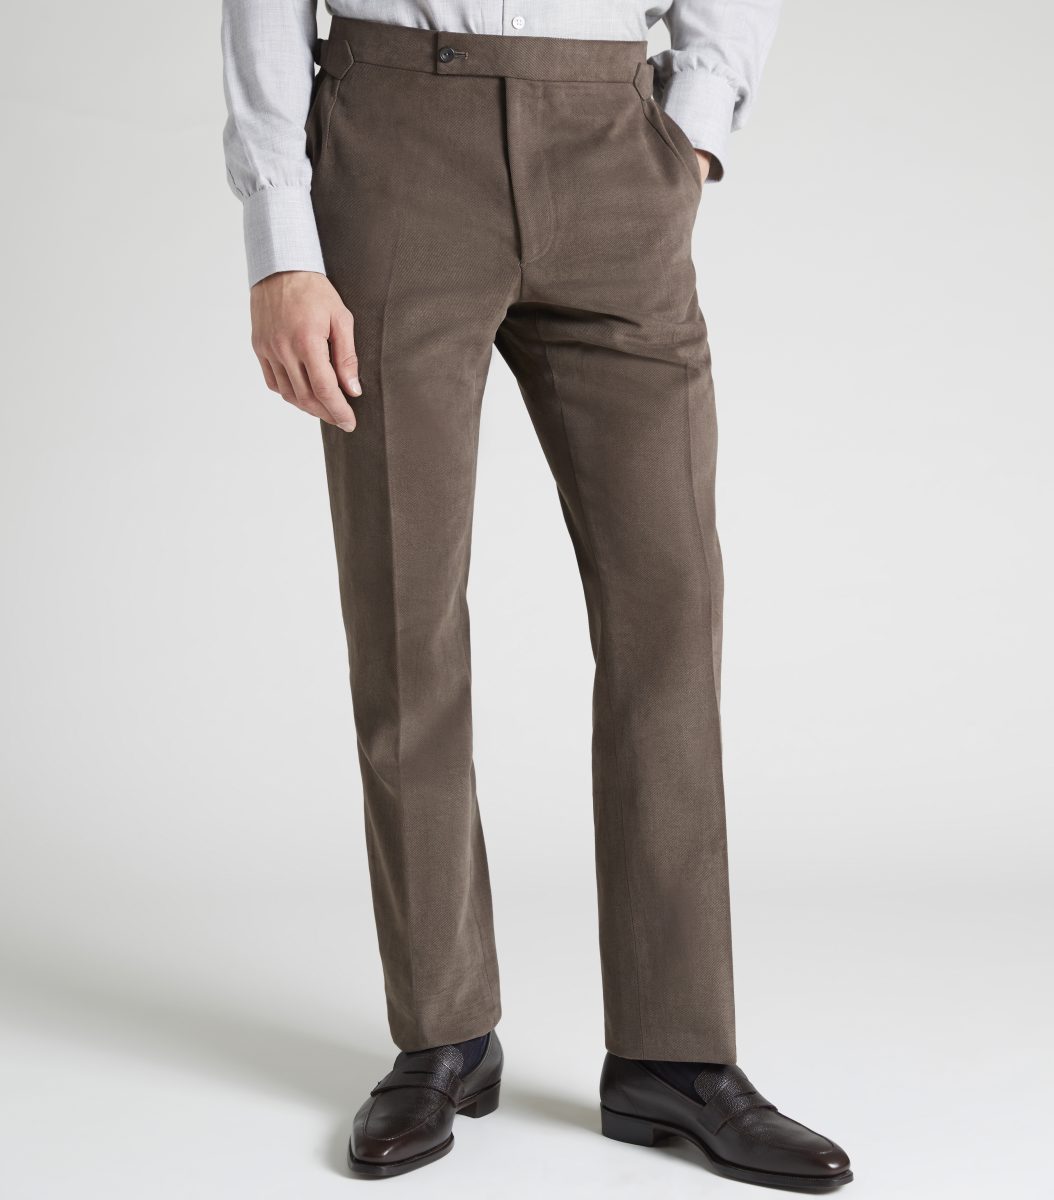 33. Brushed Cotton Trousers 